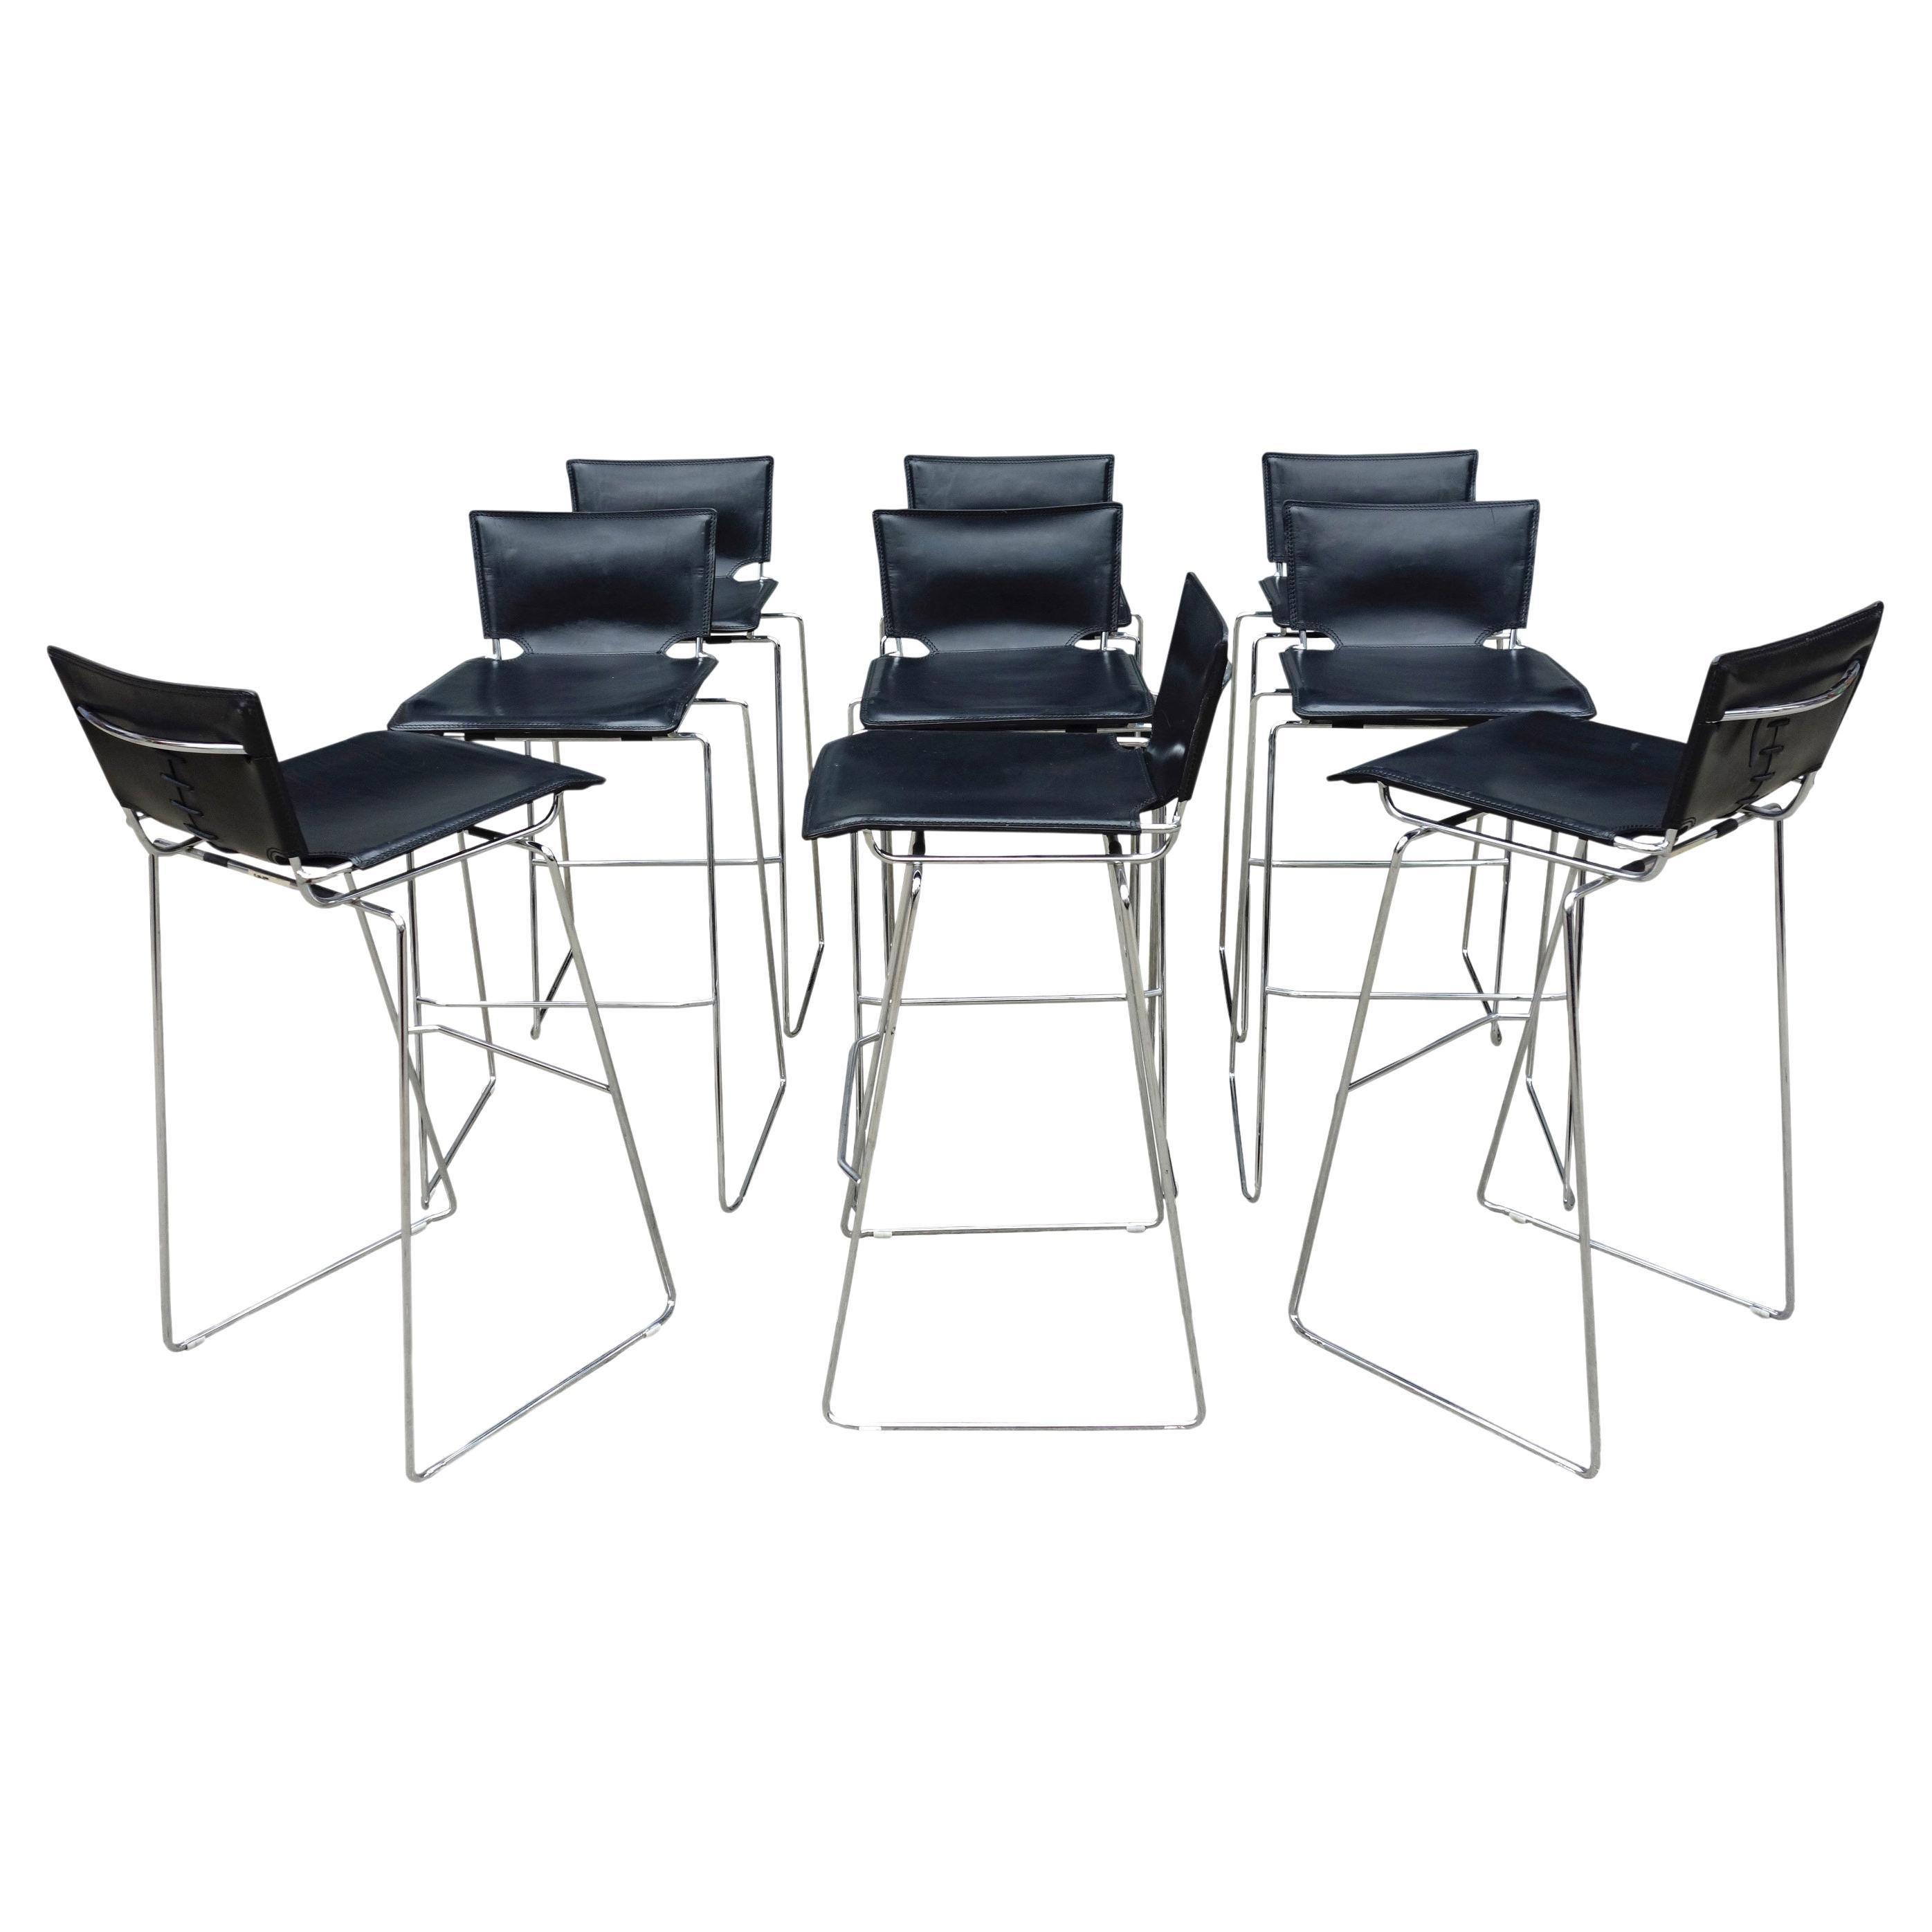 Beautiful and sleek set of 9 stackable stools designed by Toyoda Hiroyuki for ICF. Thick black leather covering a heavily chromed base. Wonderful details of stitched and laced leather. These can easily be stacked in groups of 5 as space saving